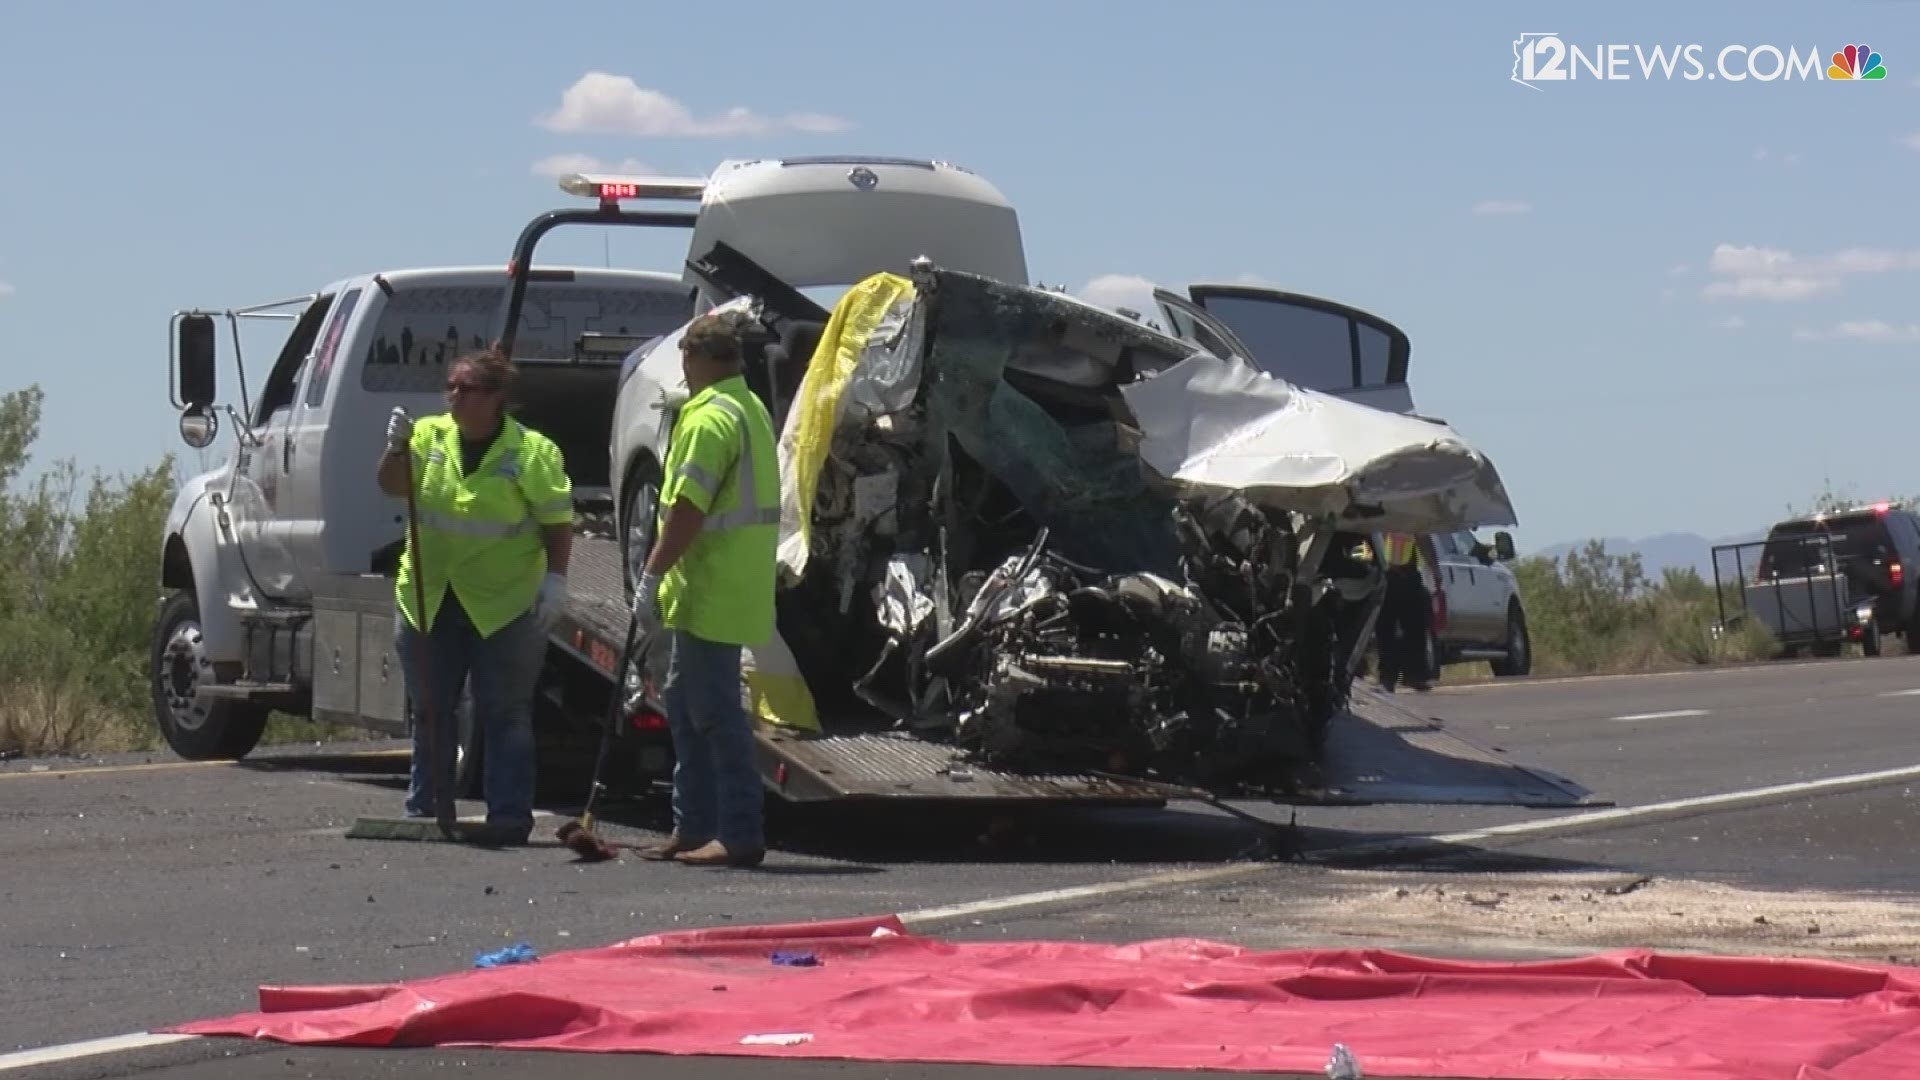 The Arizona Department of Public Safety says five people died in a wrong-way crash on Interstate 40 near Kingman Friday morning. According to DPS, the wrong-way driver was reported just after 9 a.m. on Friday traveling eastbound in the westbound lanes of I-40.